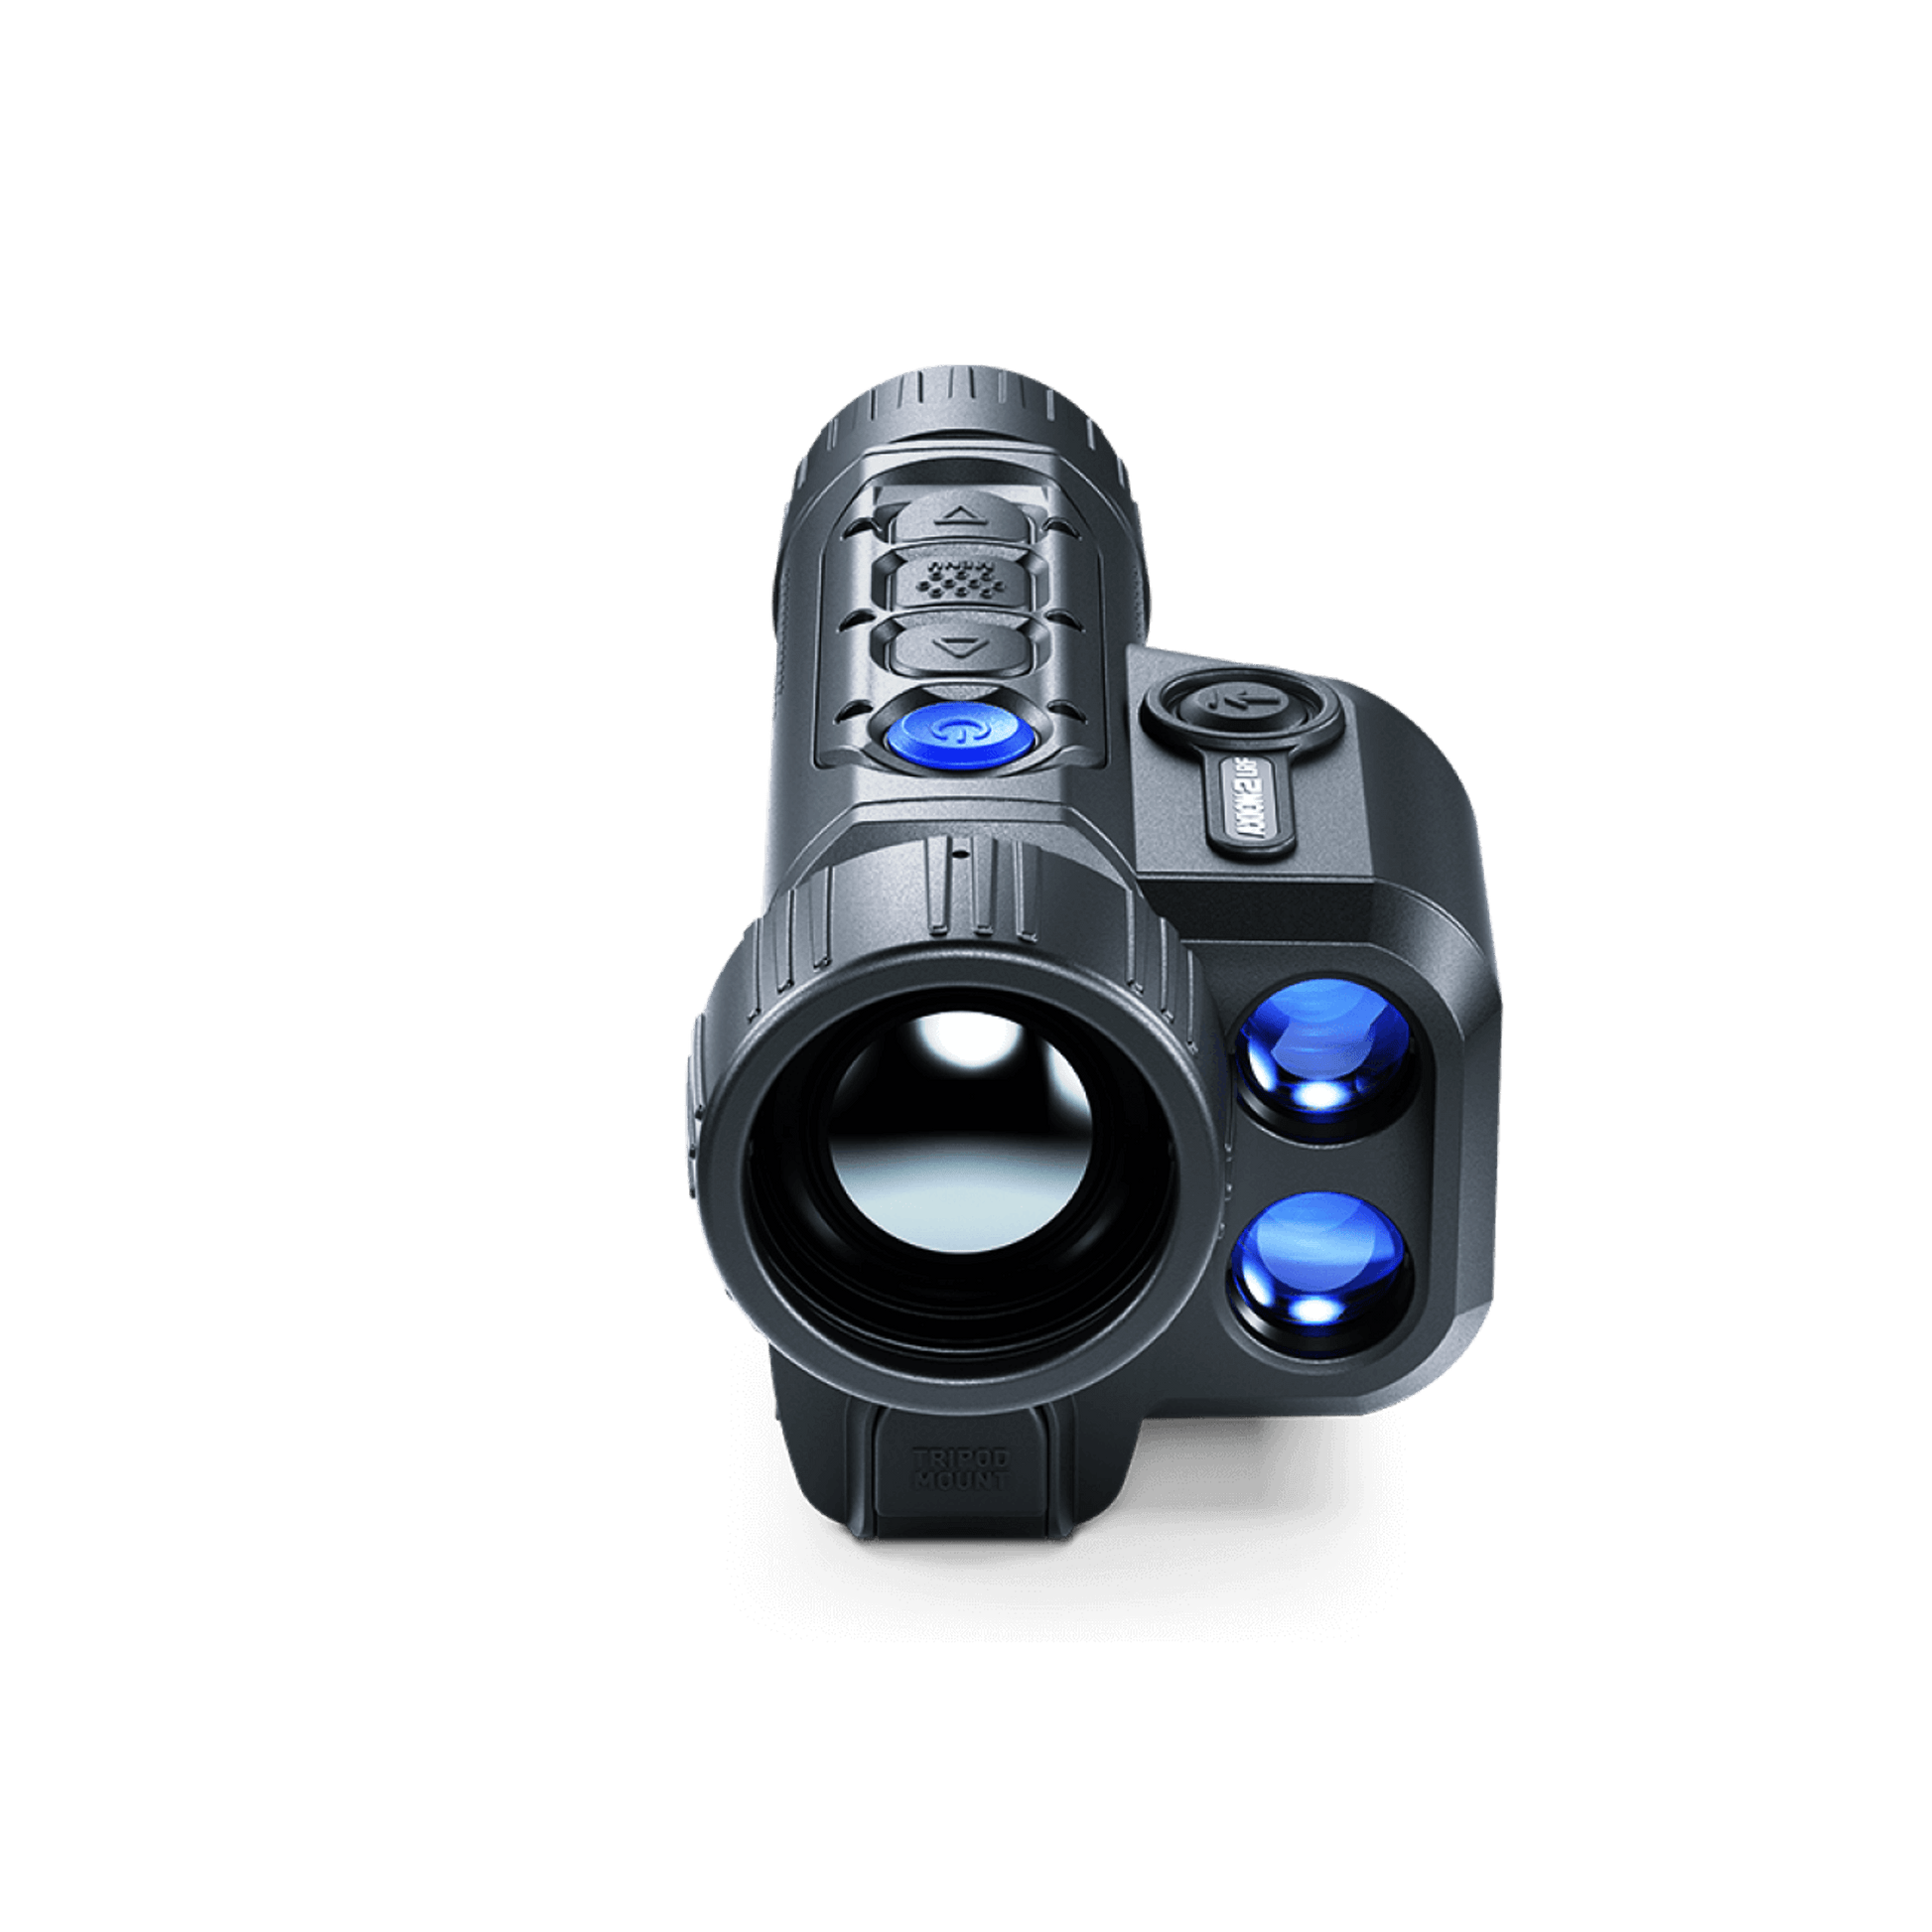 Pulsar Axion 2 XQ35 LRF Handheld Thermal Monocular for Sale with Cape Thermal Front View